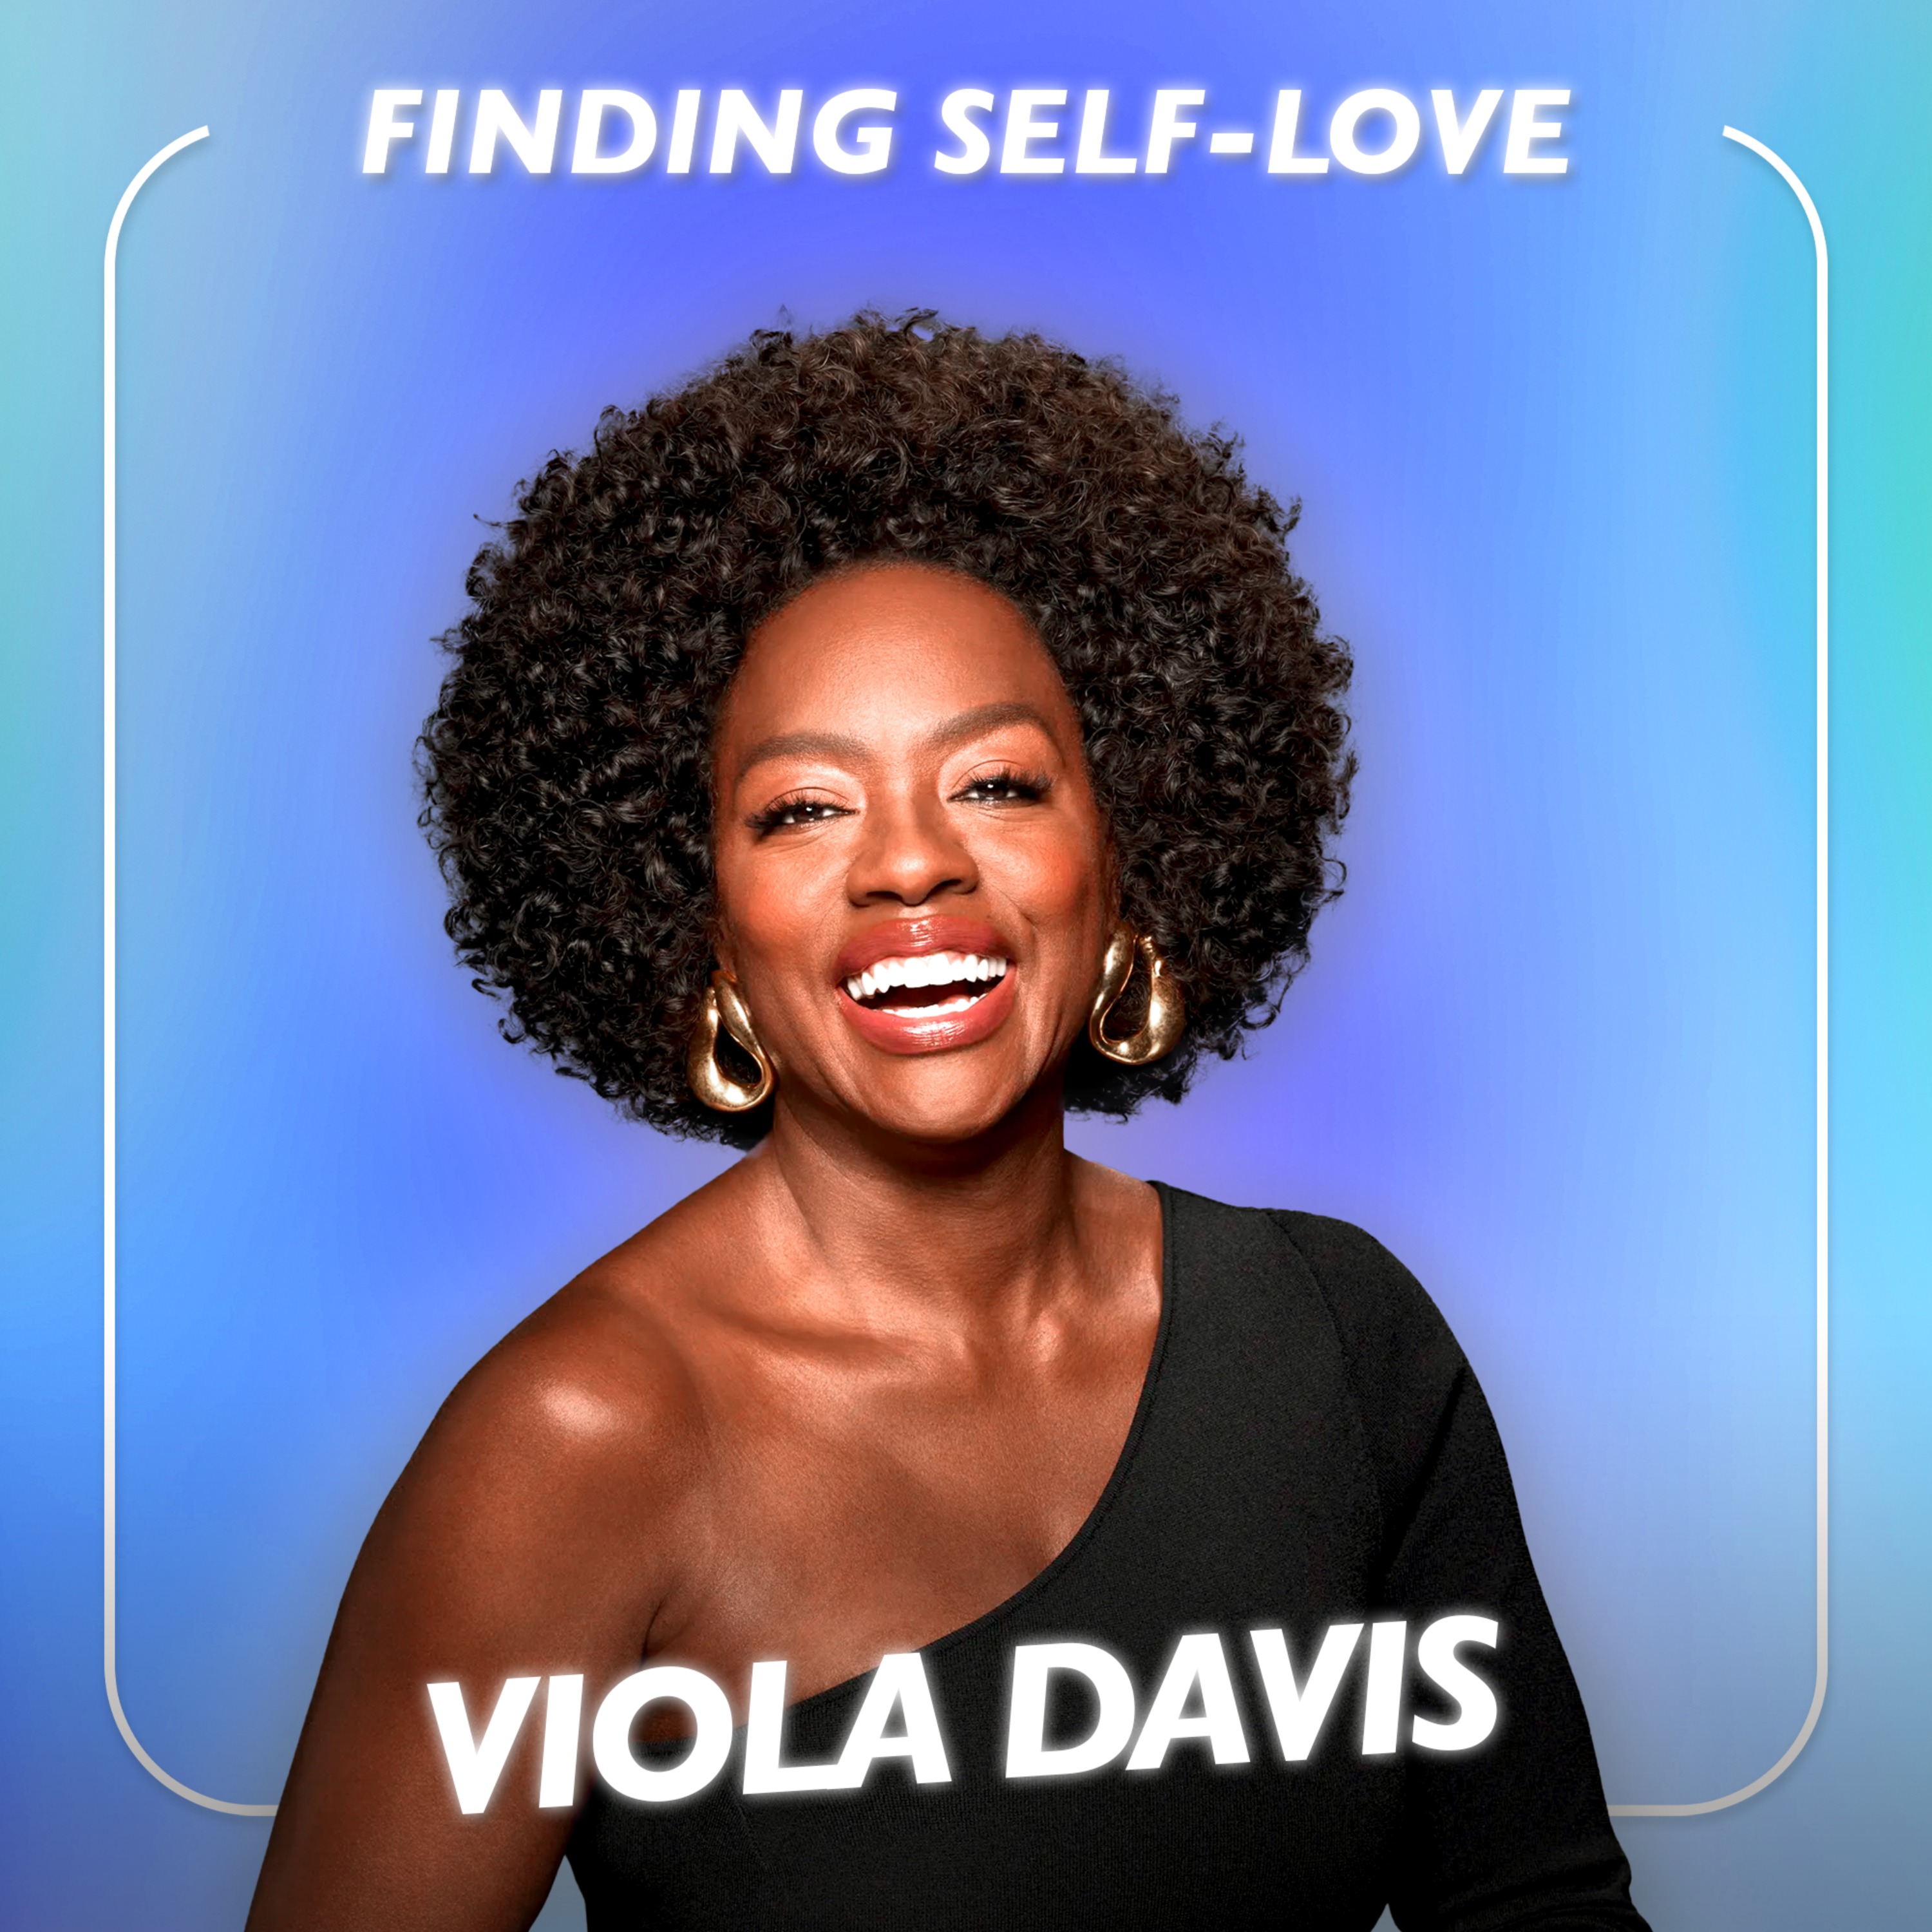 Viola Davis, Actress and Producer - "I had a hard time finding self-love"